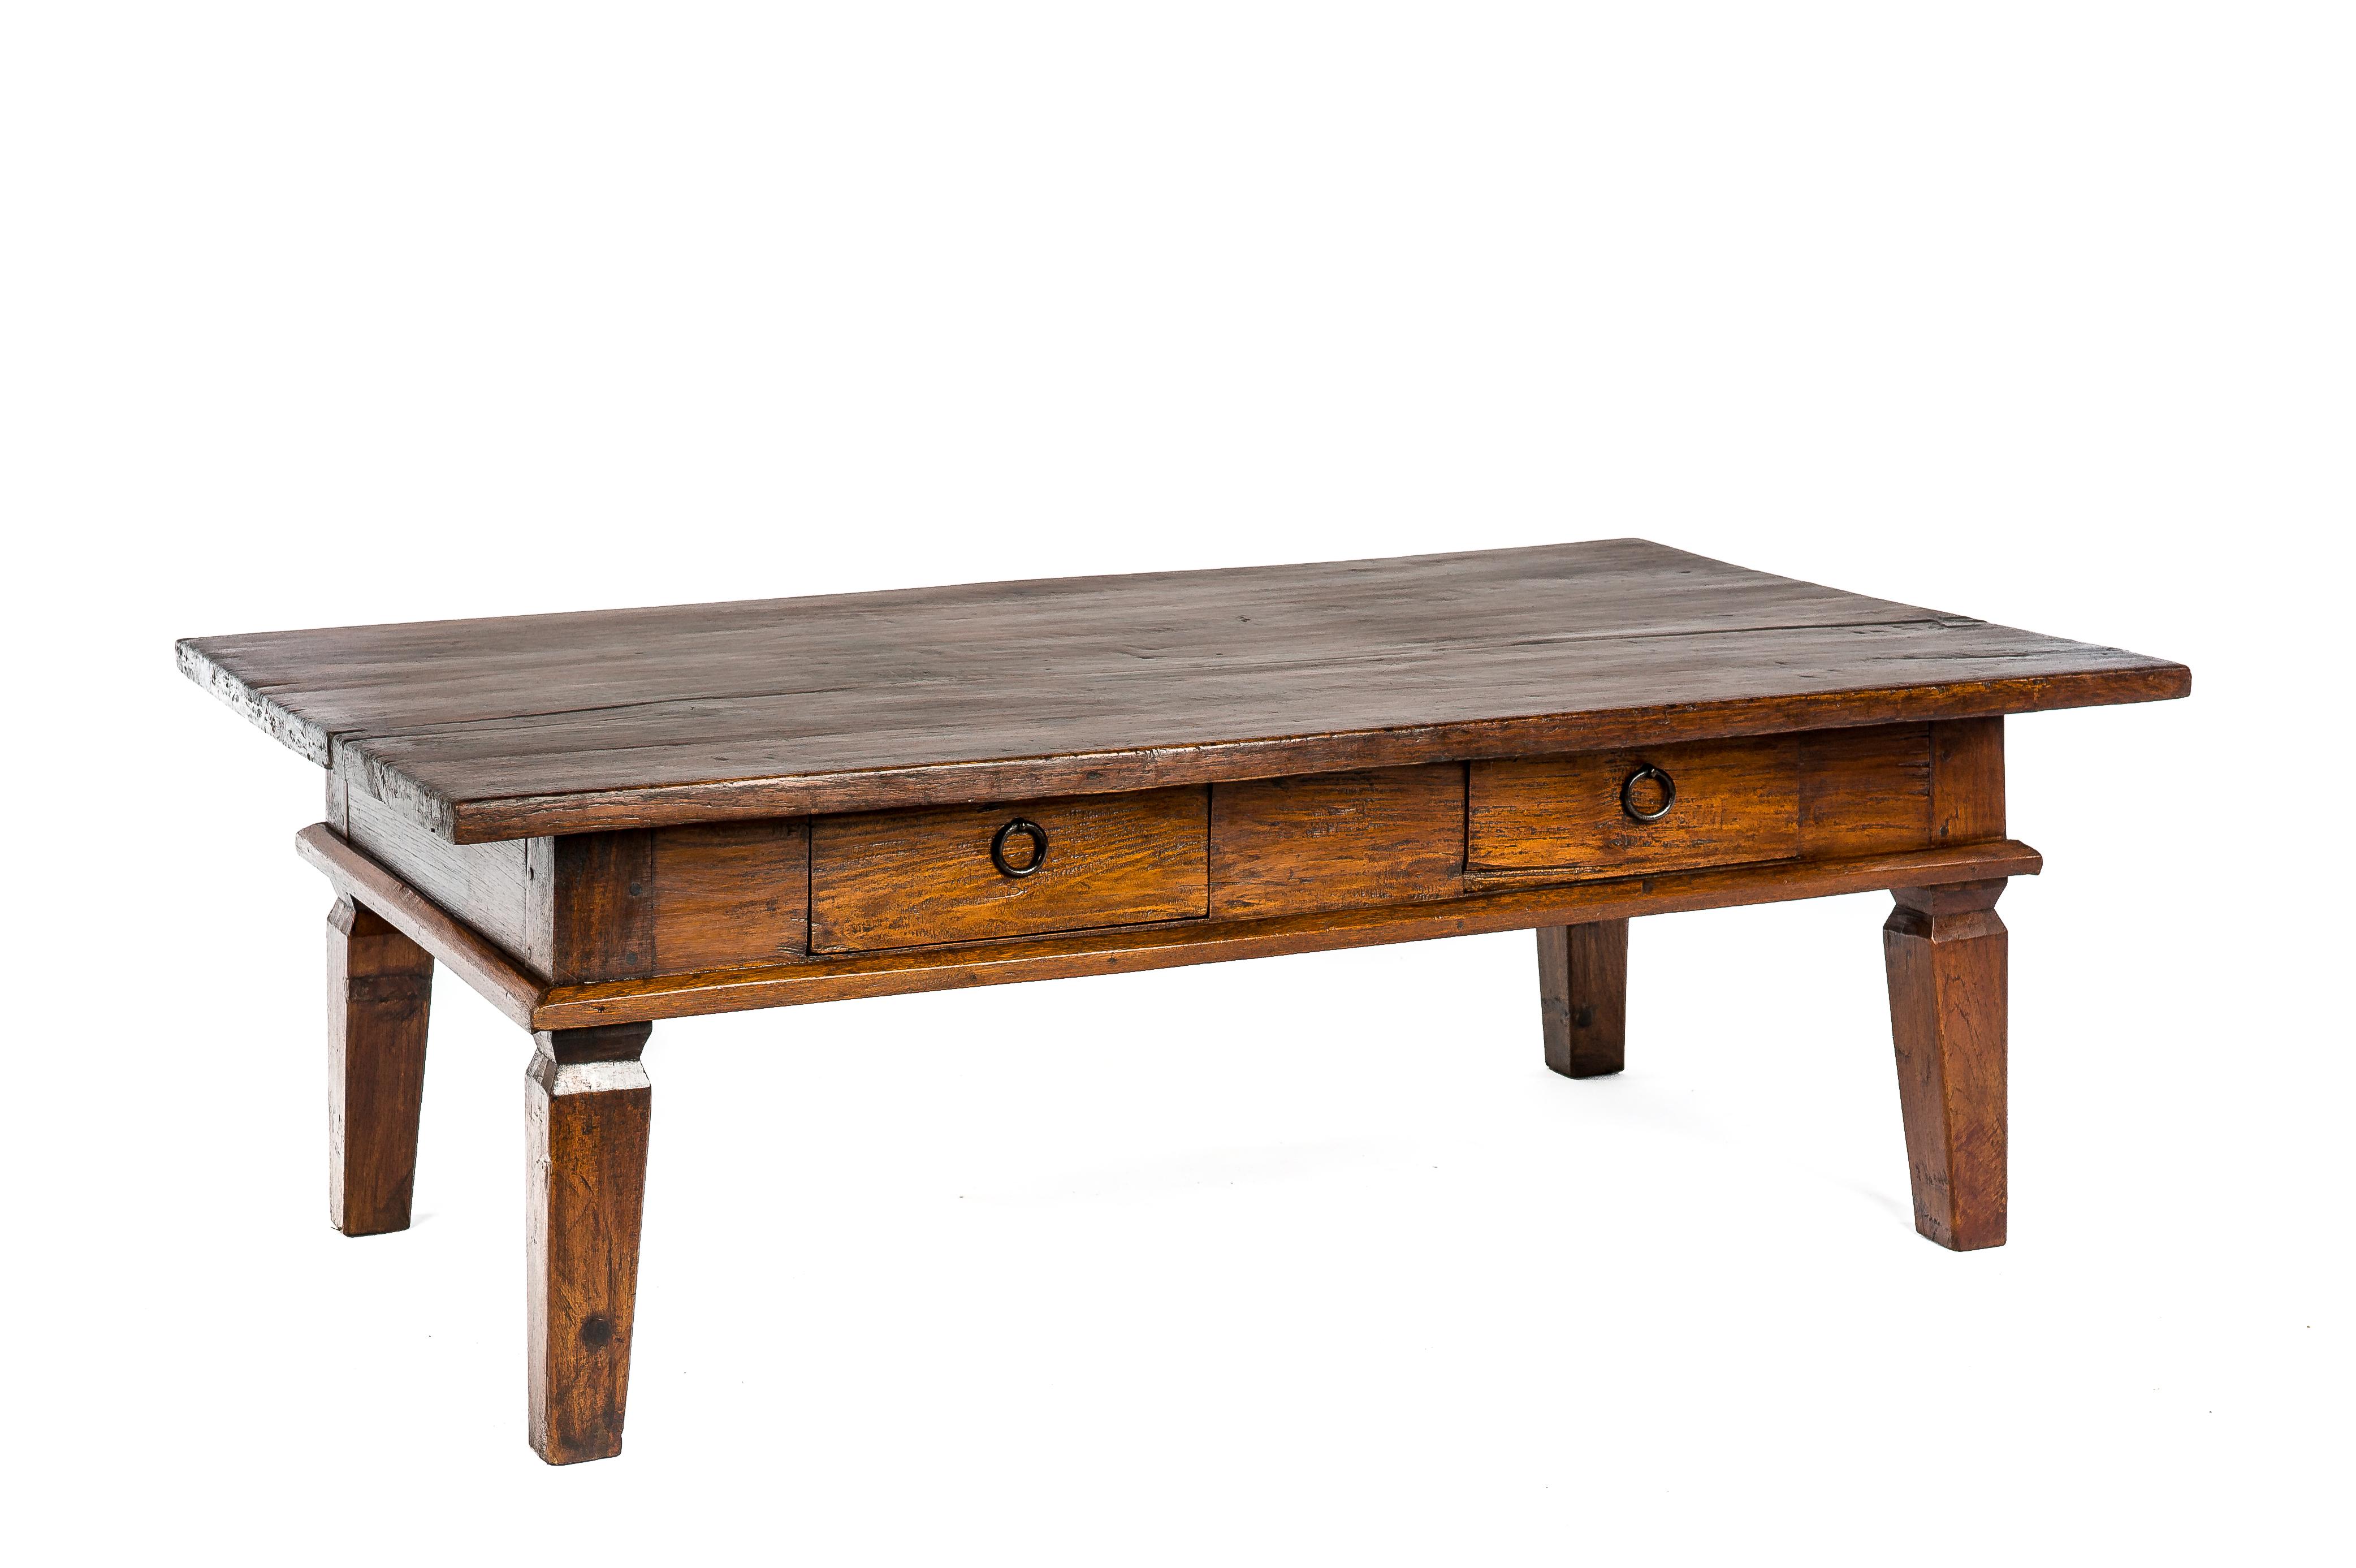 Polished Antique Early 20th Century Dutch Colonial Teak Warm Brown Coffee Table For Sale